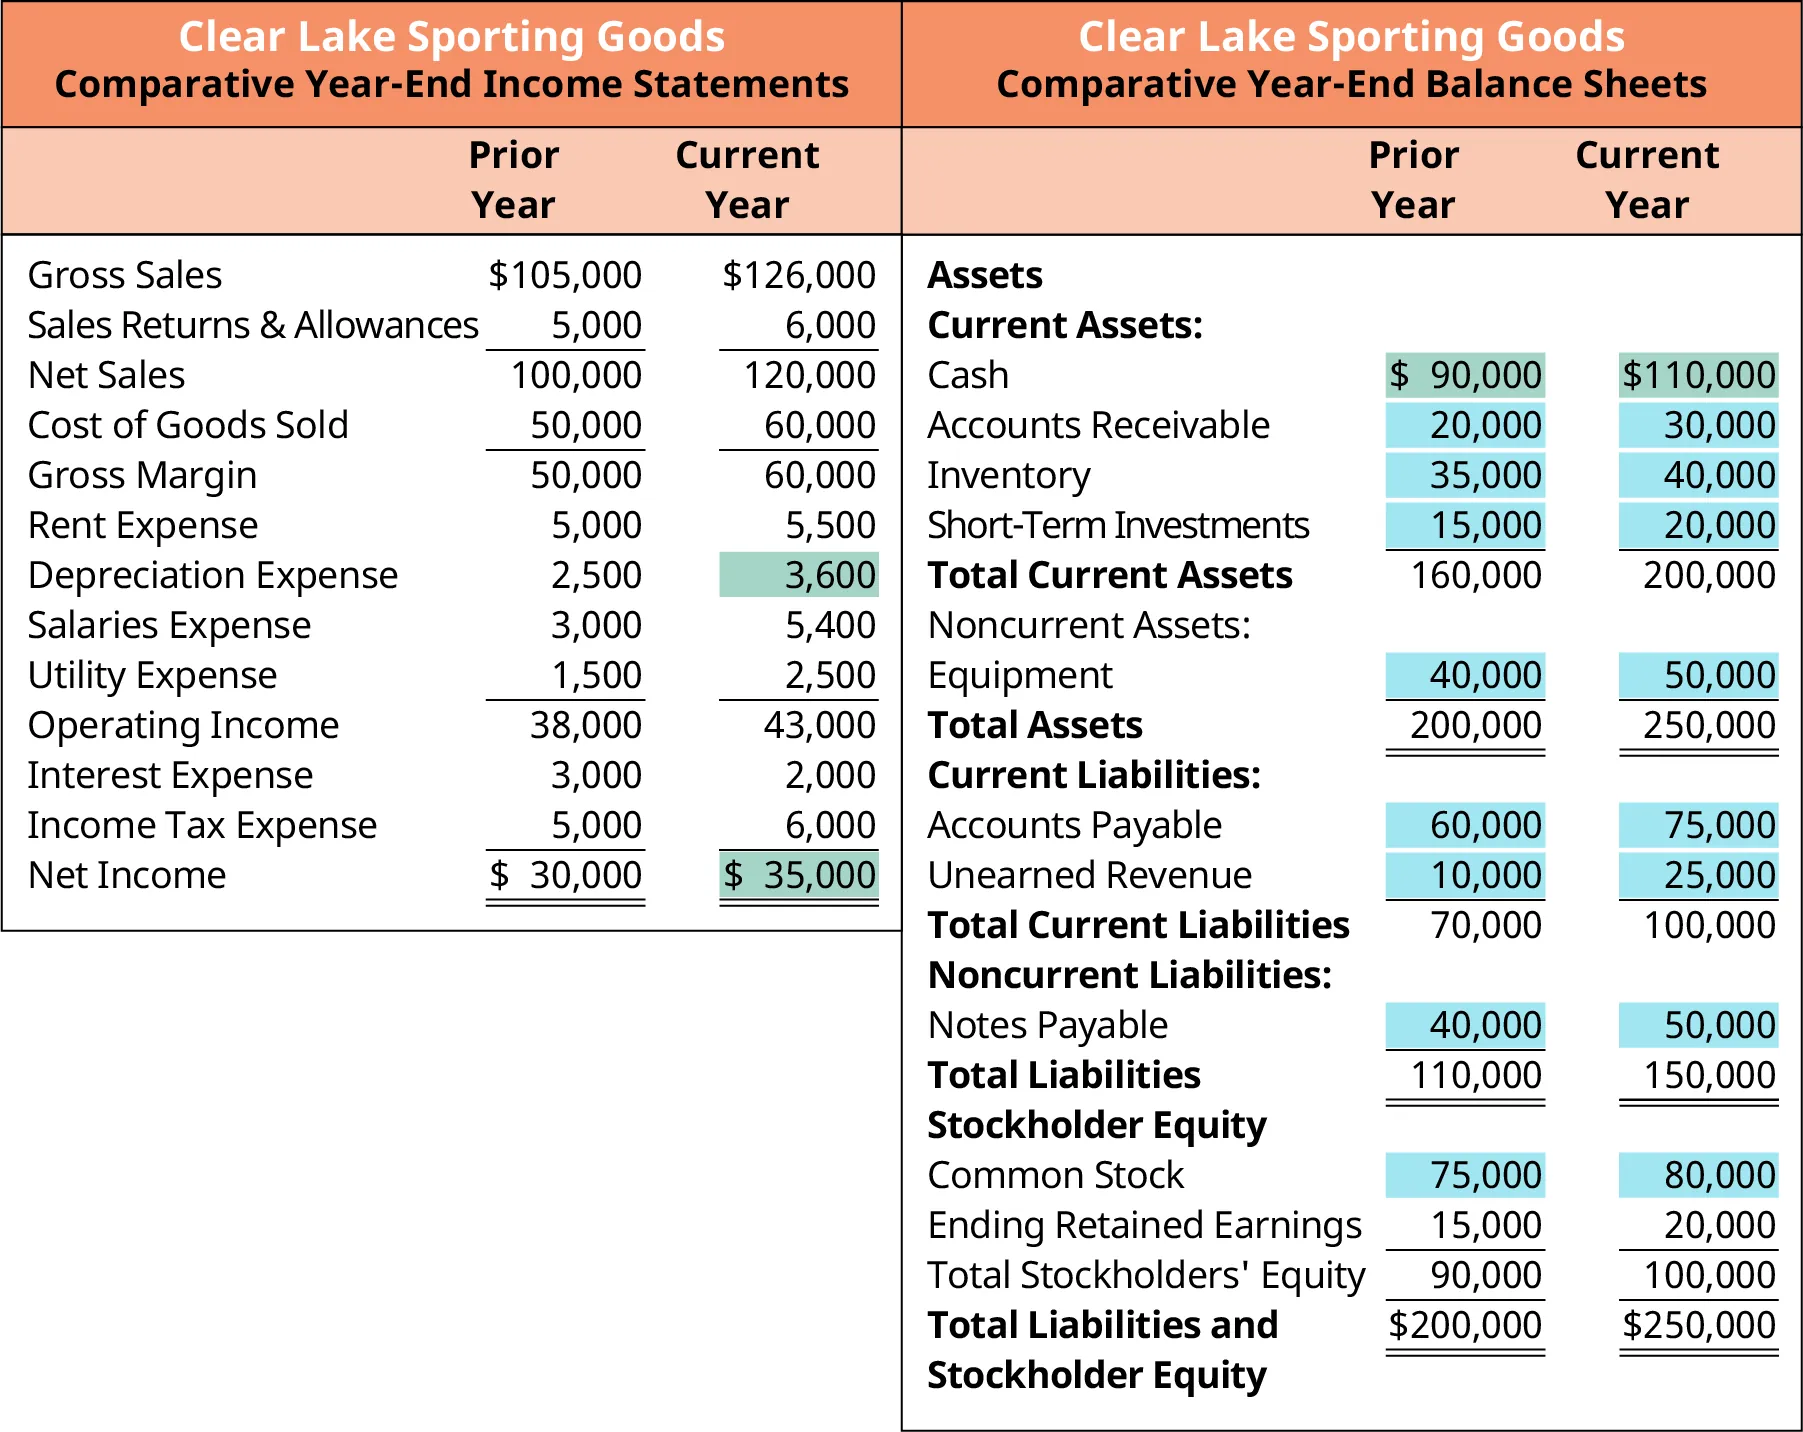 Comparative Income Statements and Balance Sheets for Clear Lake Sporting Goods. On Clear Lake Sporting Good's Comparative Year-End Income Statement, the current year depreciation expense and net income figures are highlighted. On the company's comparative year-end balance sheet, the following figures are highlighted for both the prior and current year: Current assets (which in this example includes cash, accounts receivable, inventory, & short-term investments); Noncurrent assets (which includes equipment); current liabilities (in this case, accounts payable and unearned revenue), noncurrent liabilities (which only includes notes payable), and common stock under total and stock holder's equity.